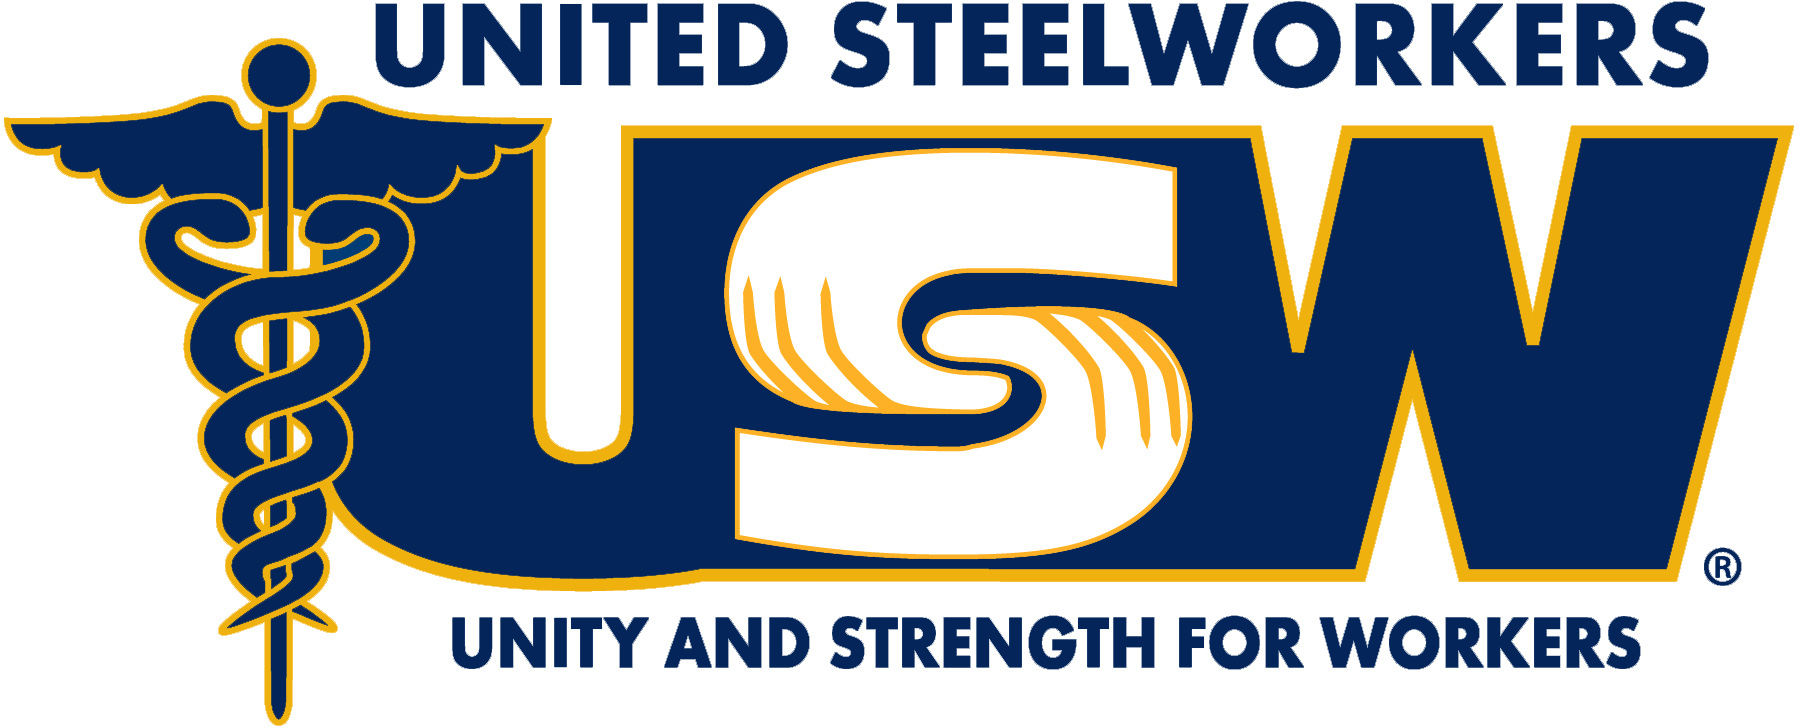 Download USW Logos, United Steelworkers. 